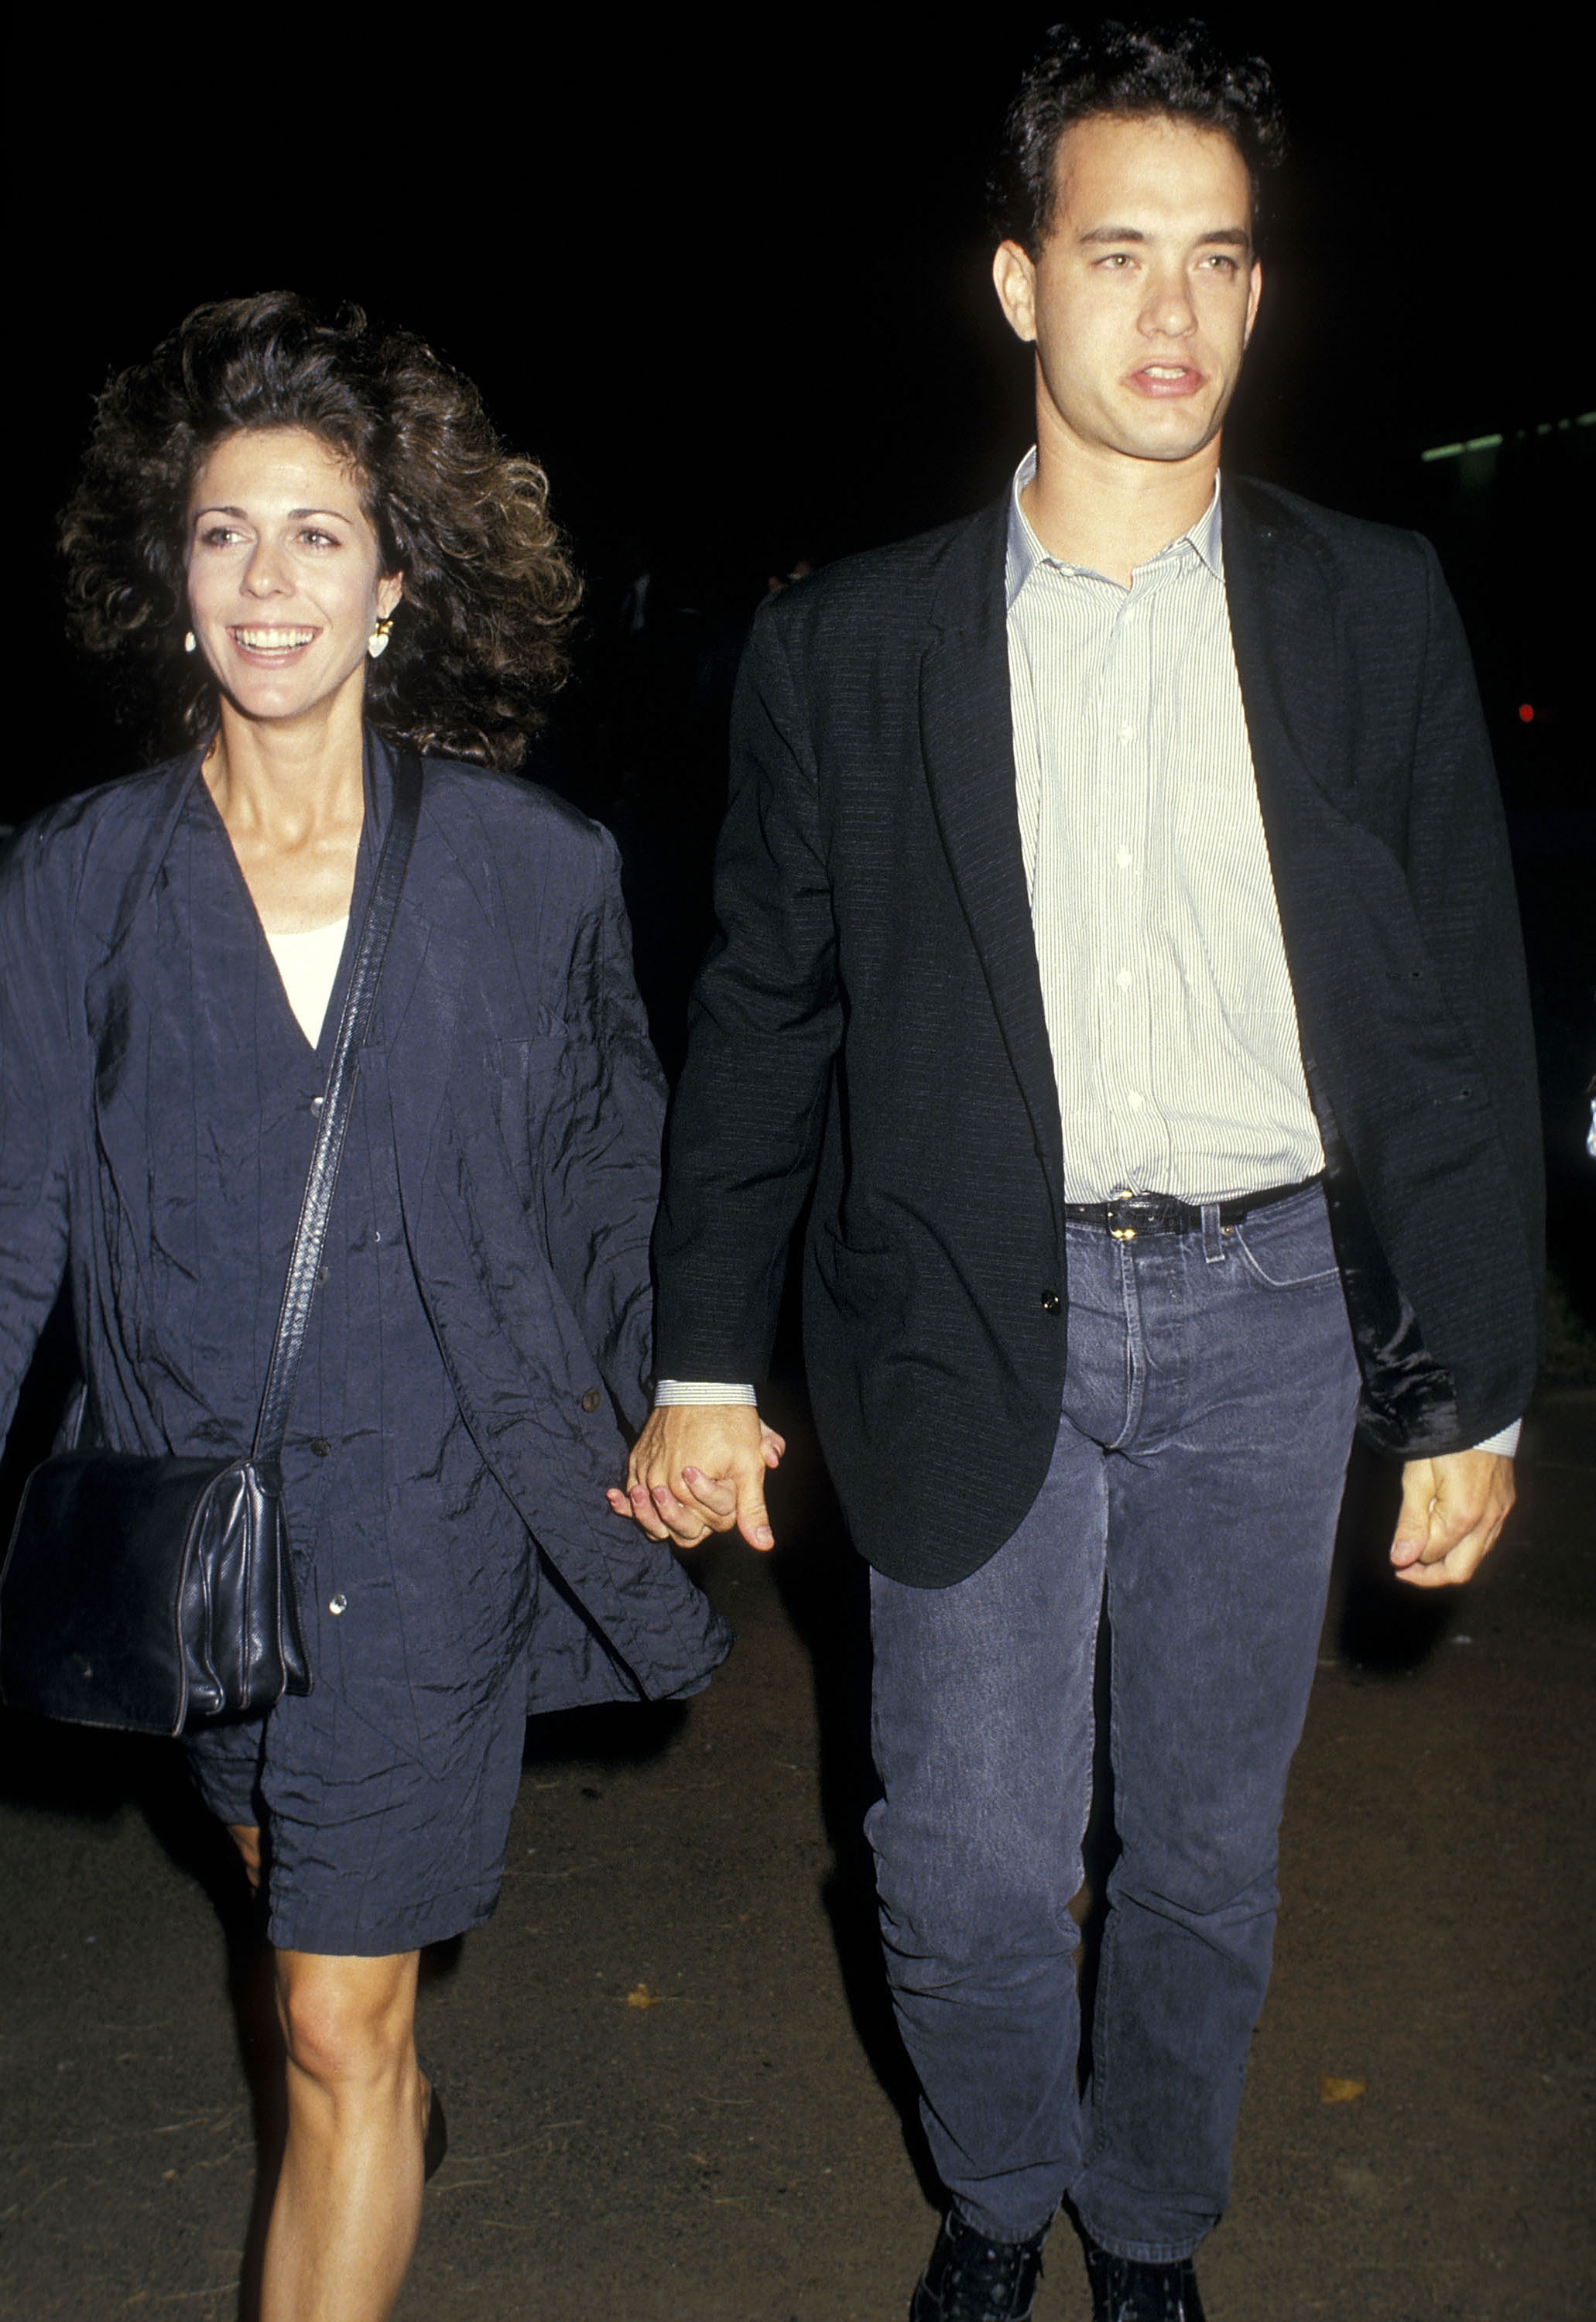 Rita Wilson and Tom Hanks hold hands as they walk outside at night